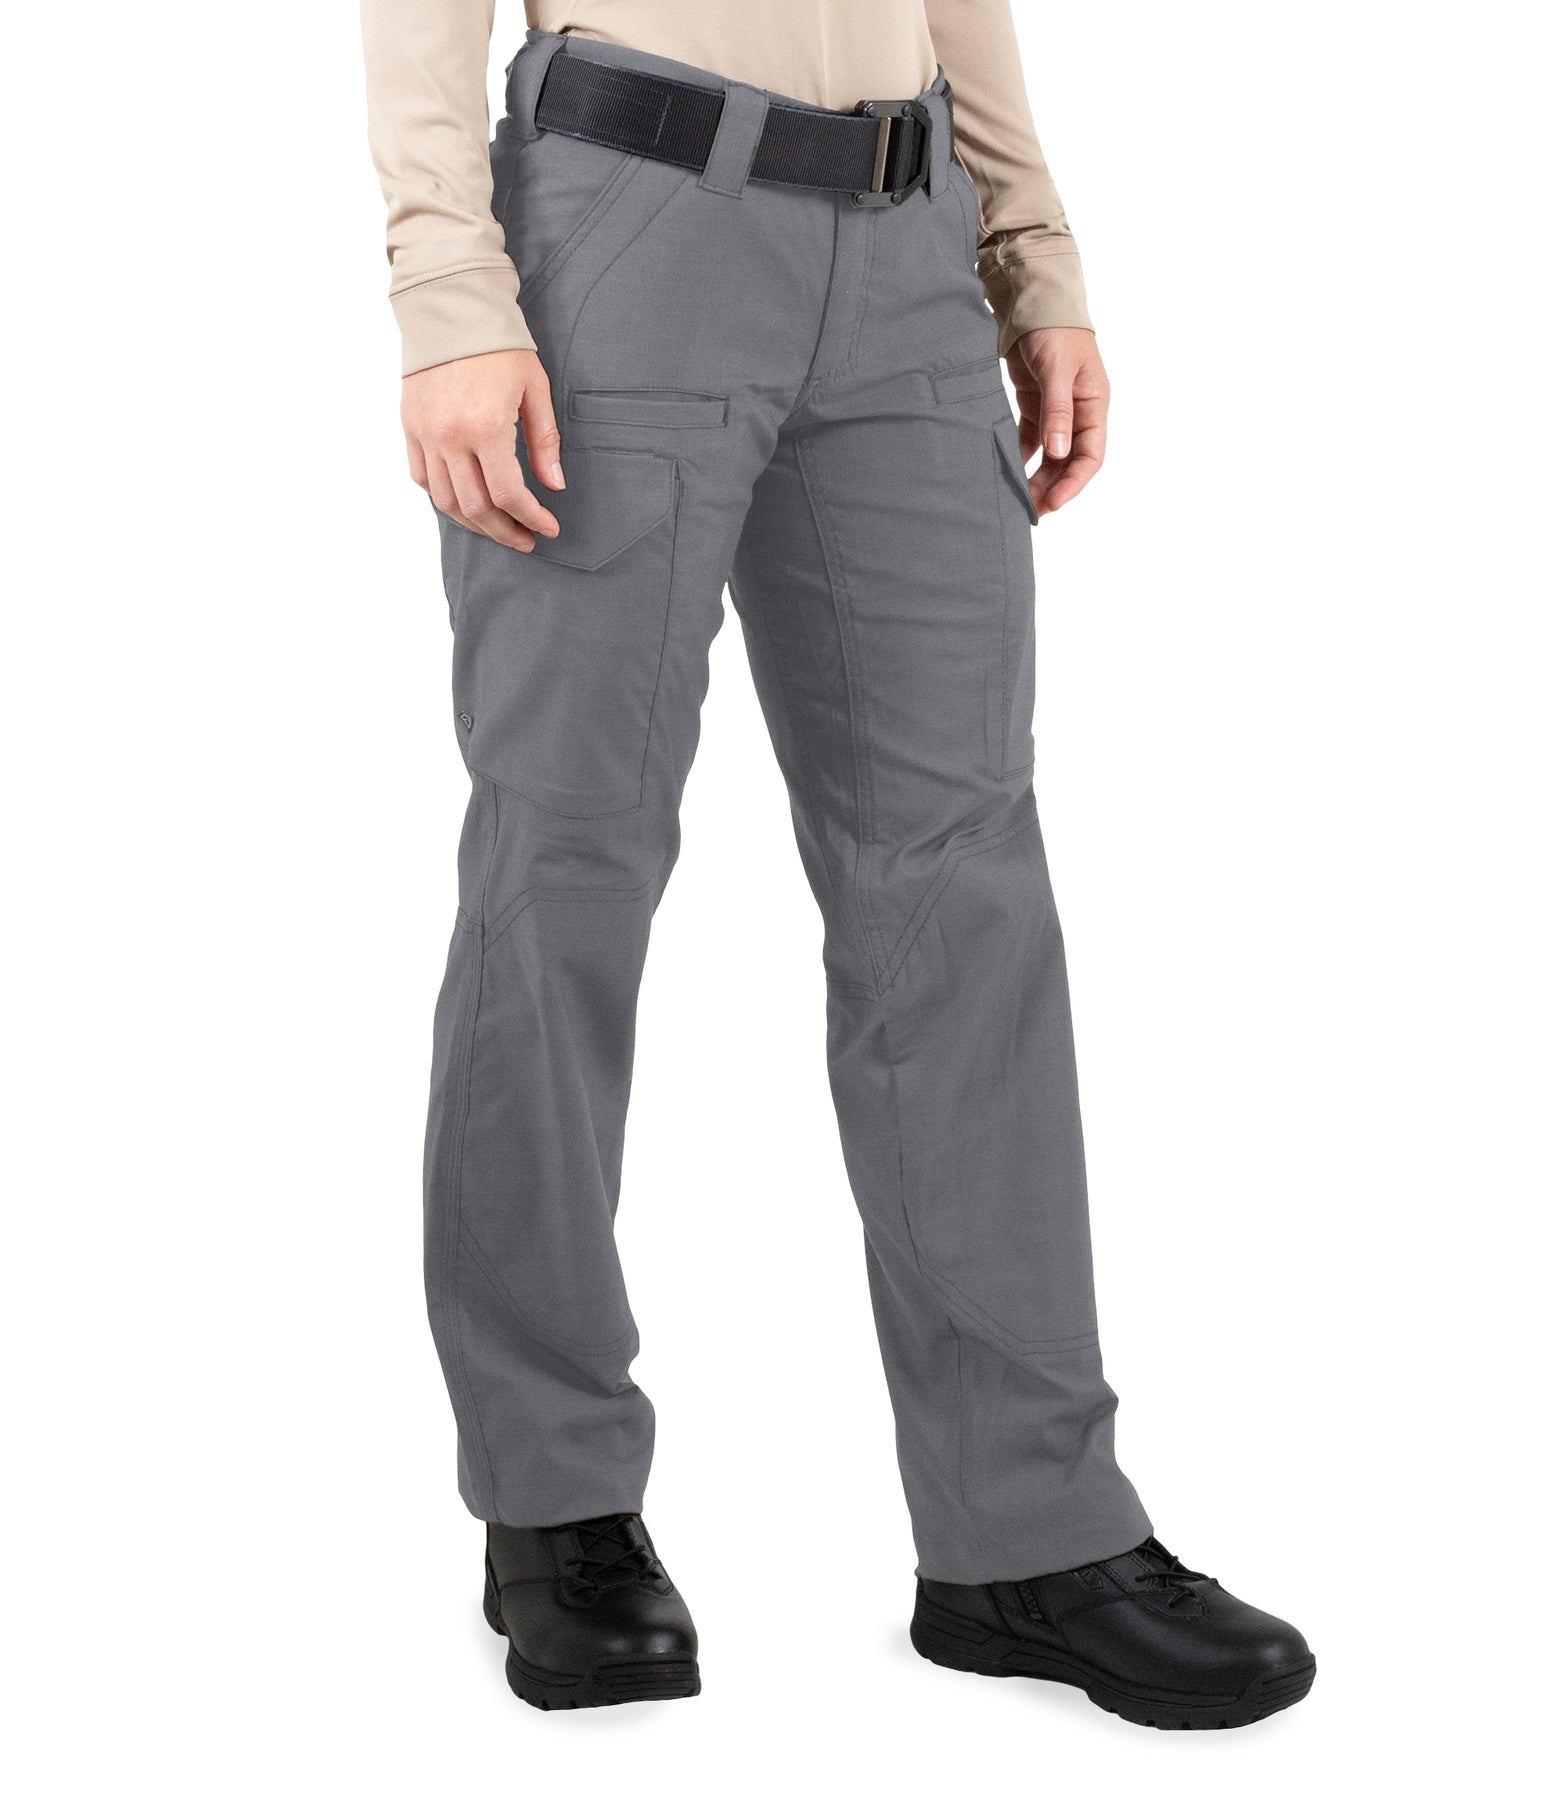 Women's V2 Tactical Pants / Wolf Grey – First Tactical